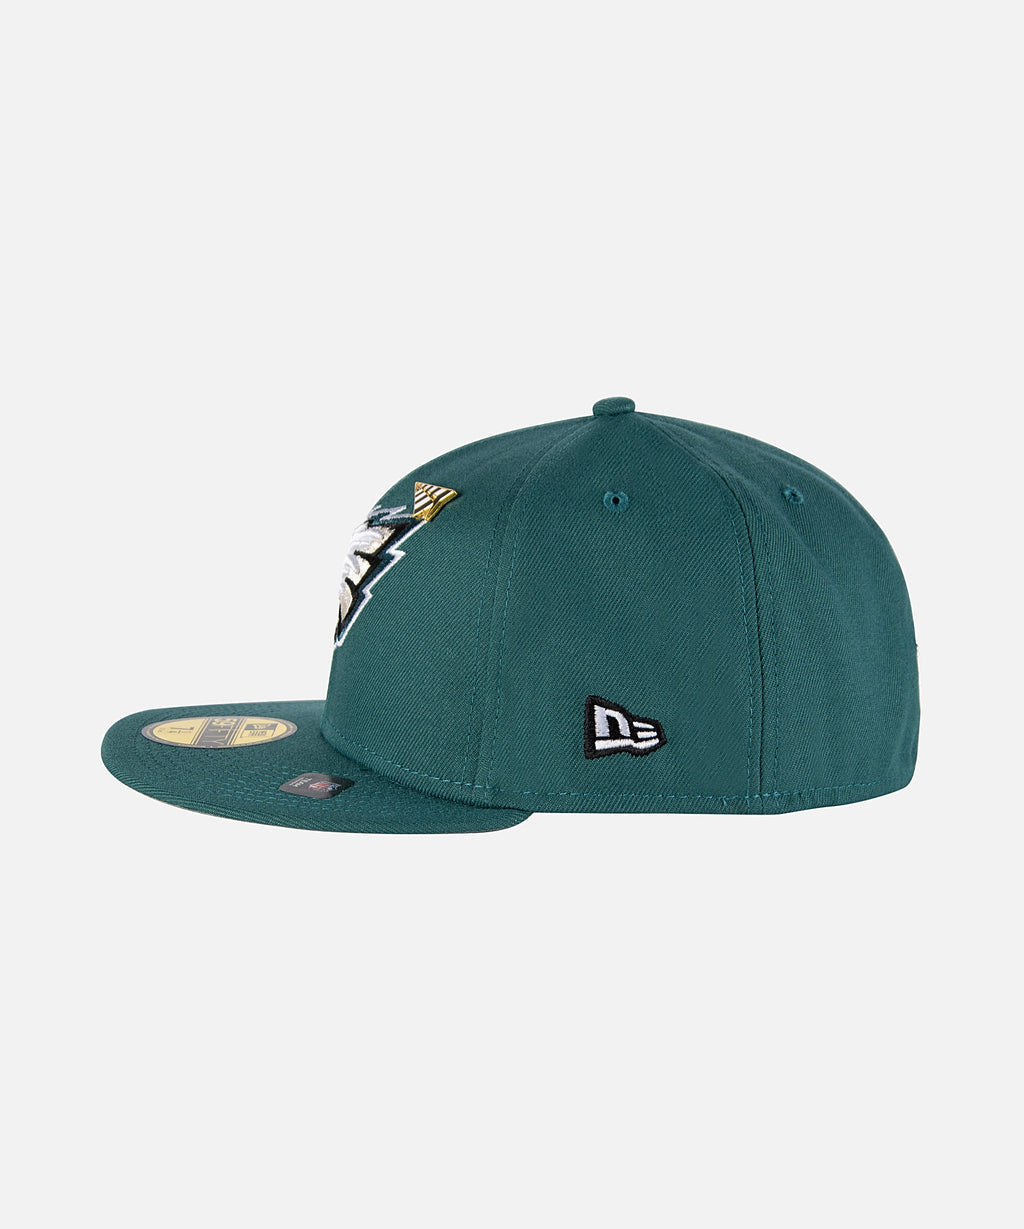 Paper Planes x Philadelphia Eagles Team Color 59Fifty Fitted Hat_For Men_4